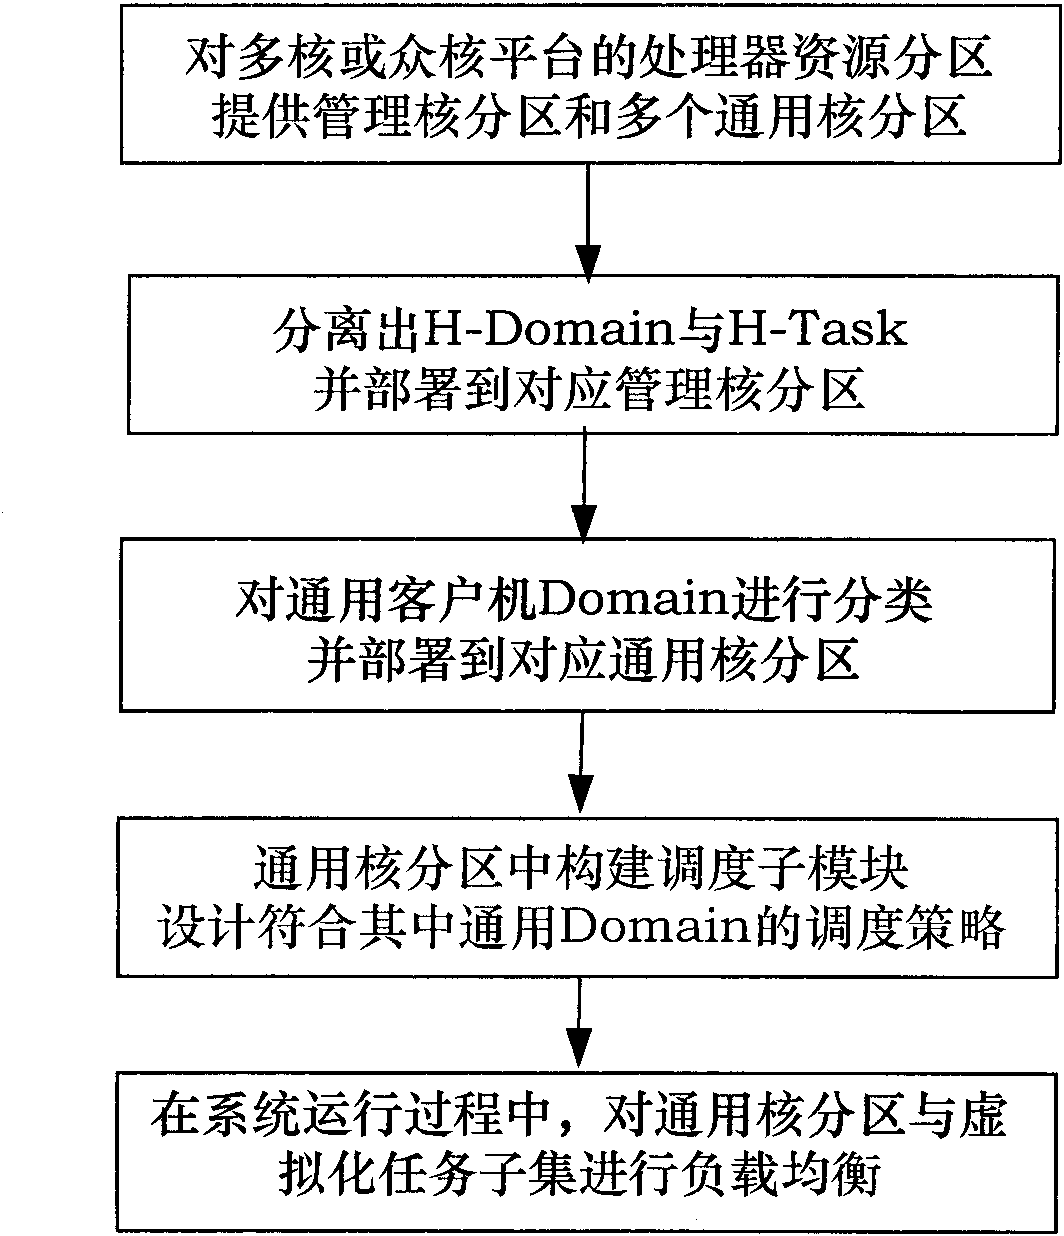 CPU virtualization method based on processor partitioning technology